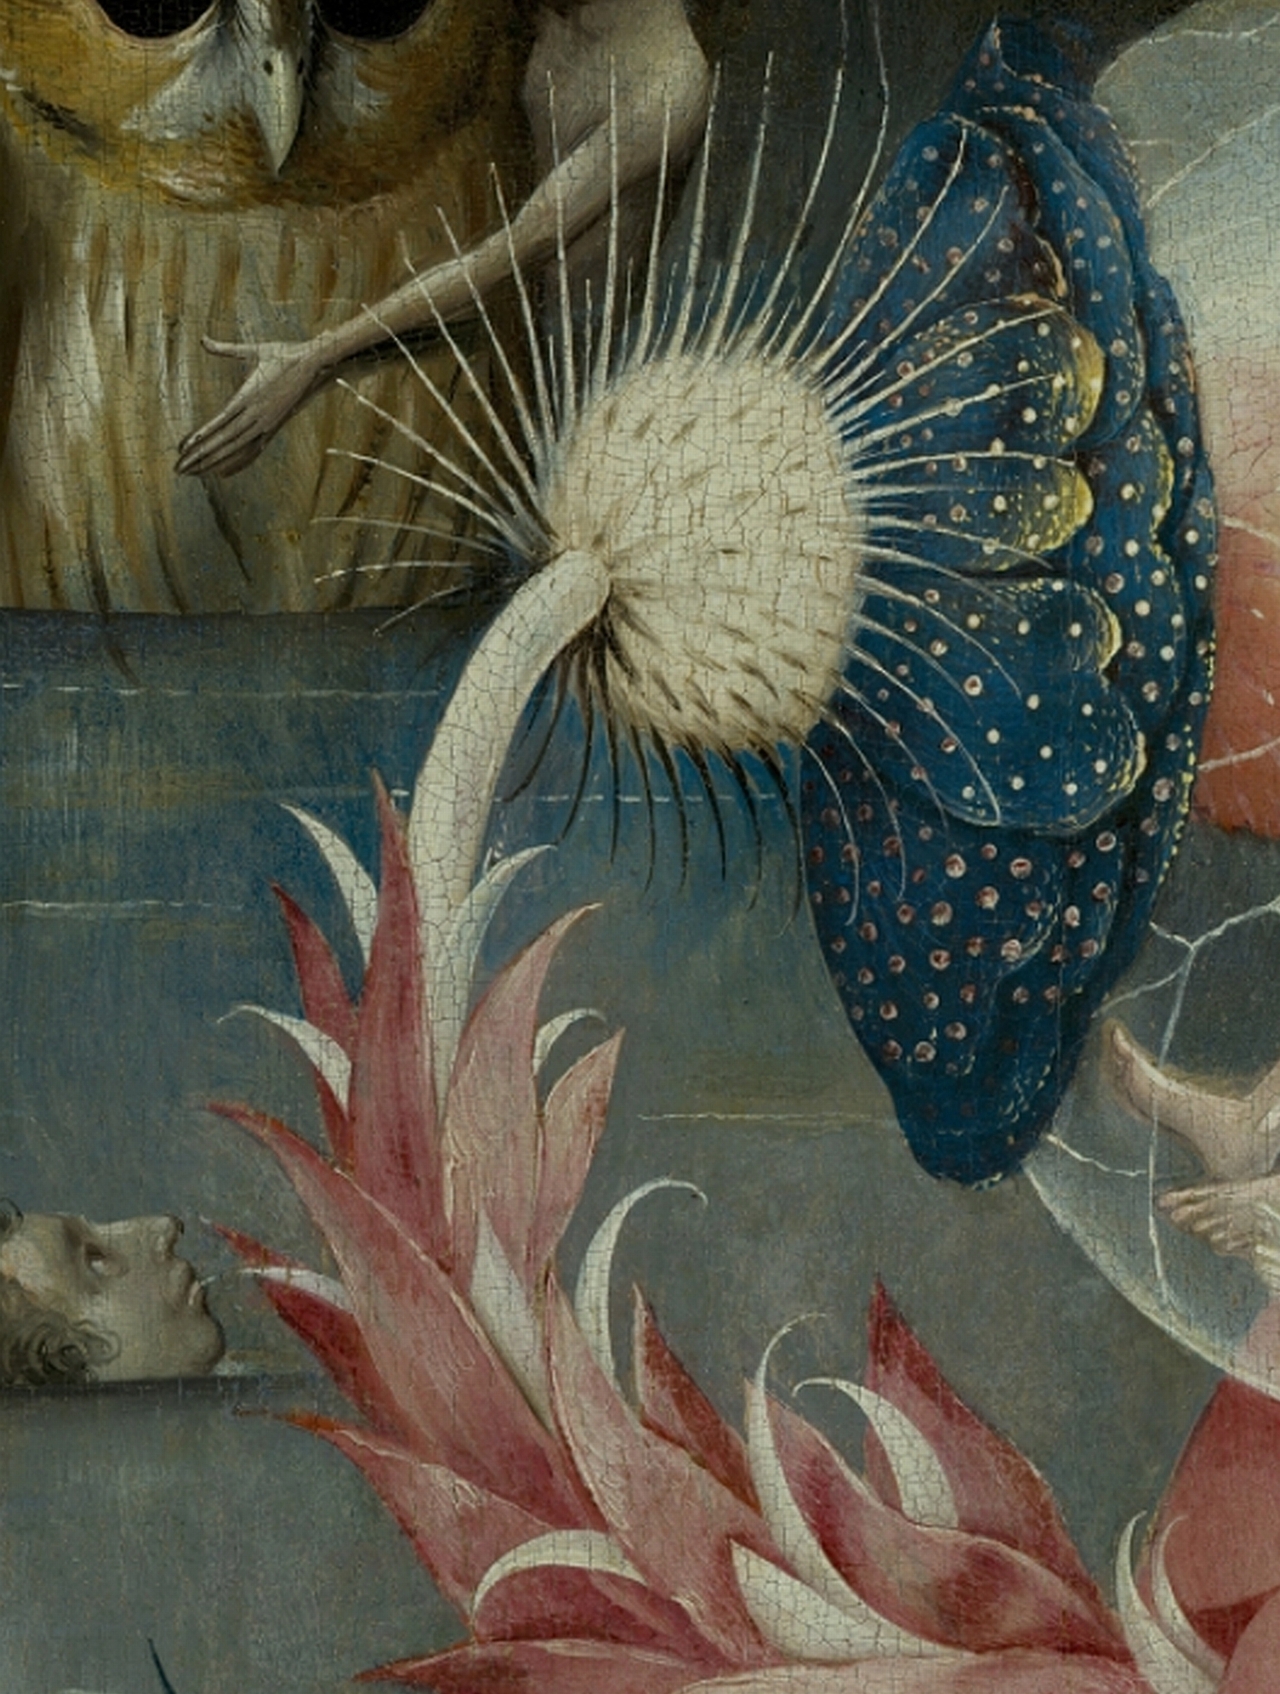 Hieronymus Bosch - The Garden of Earthly Delights (detail)